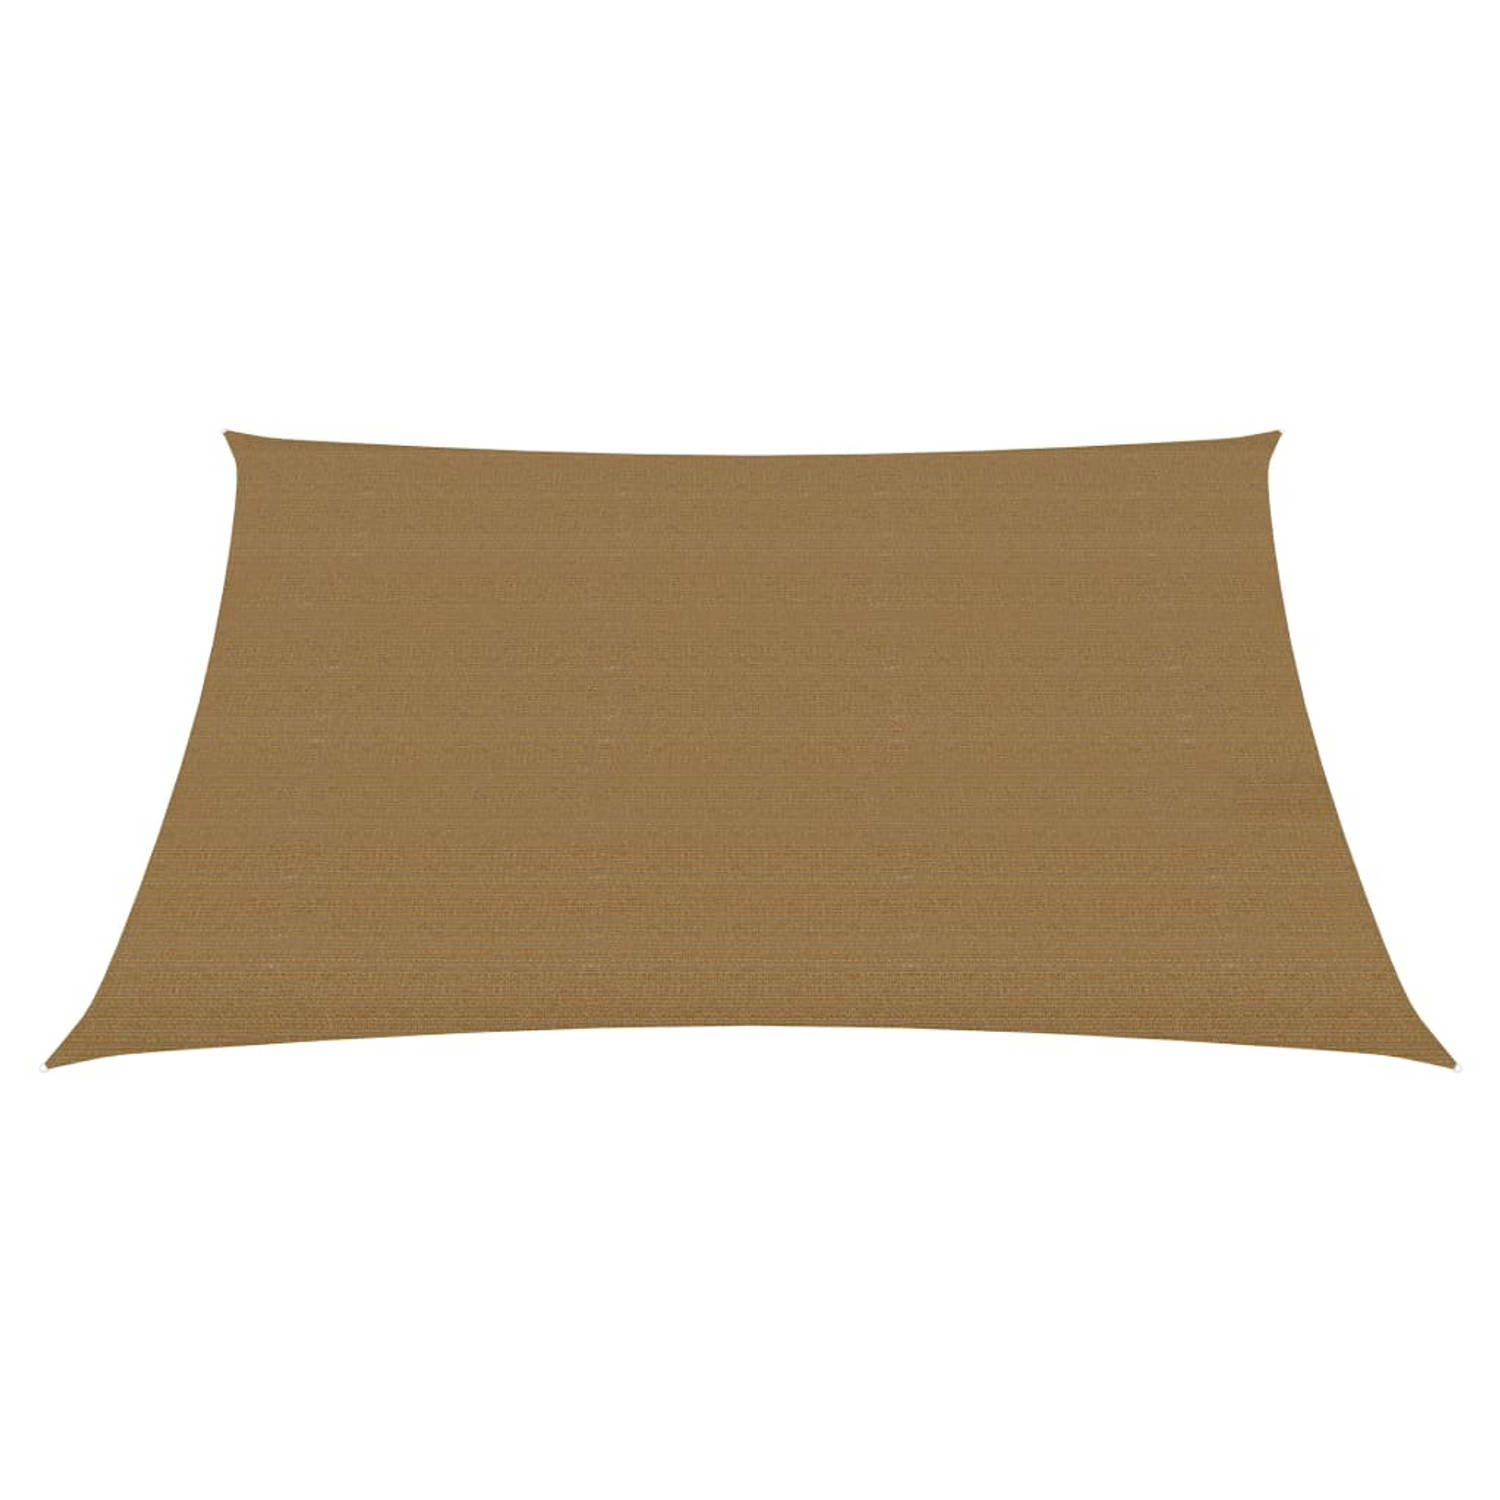 The Living Store Schaduwdoek HDPE - 4/5 x 3 m - Taupe